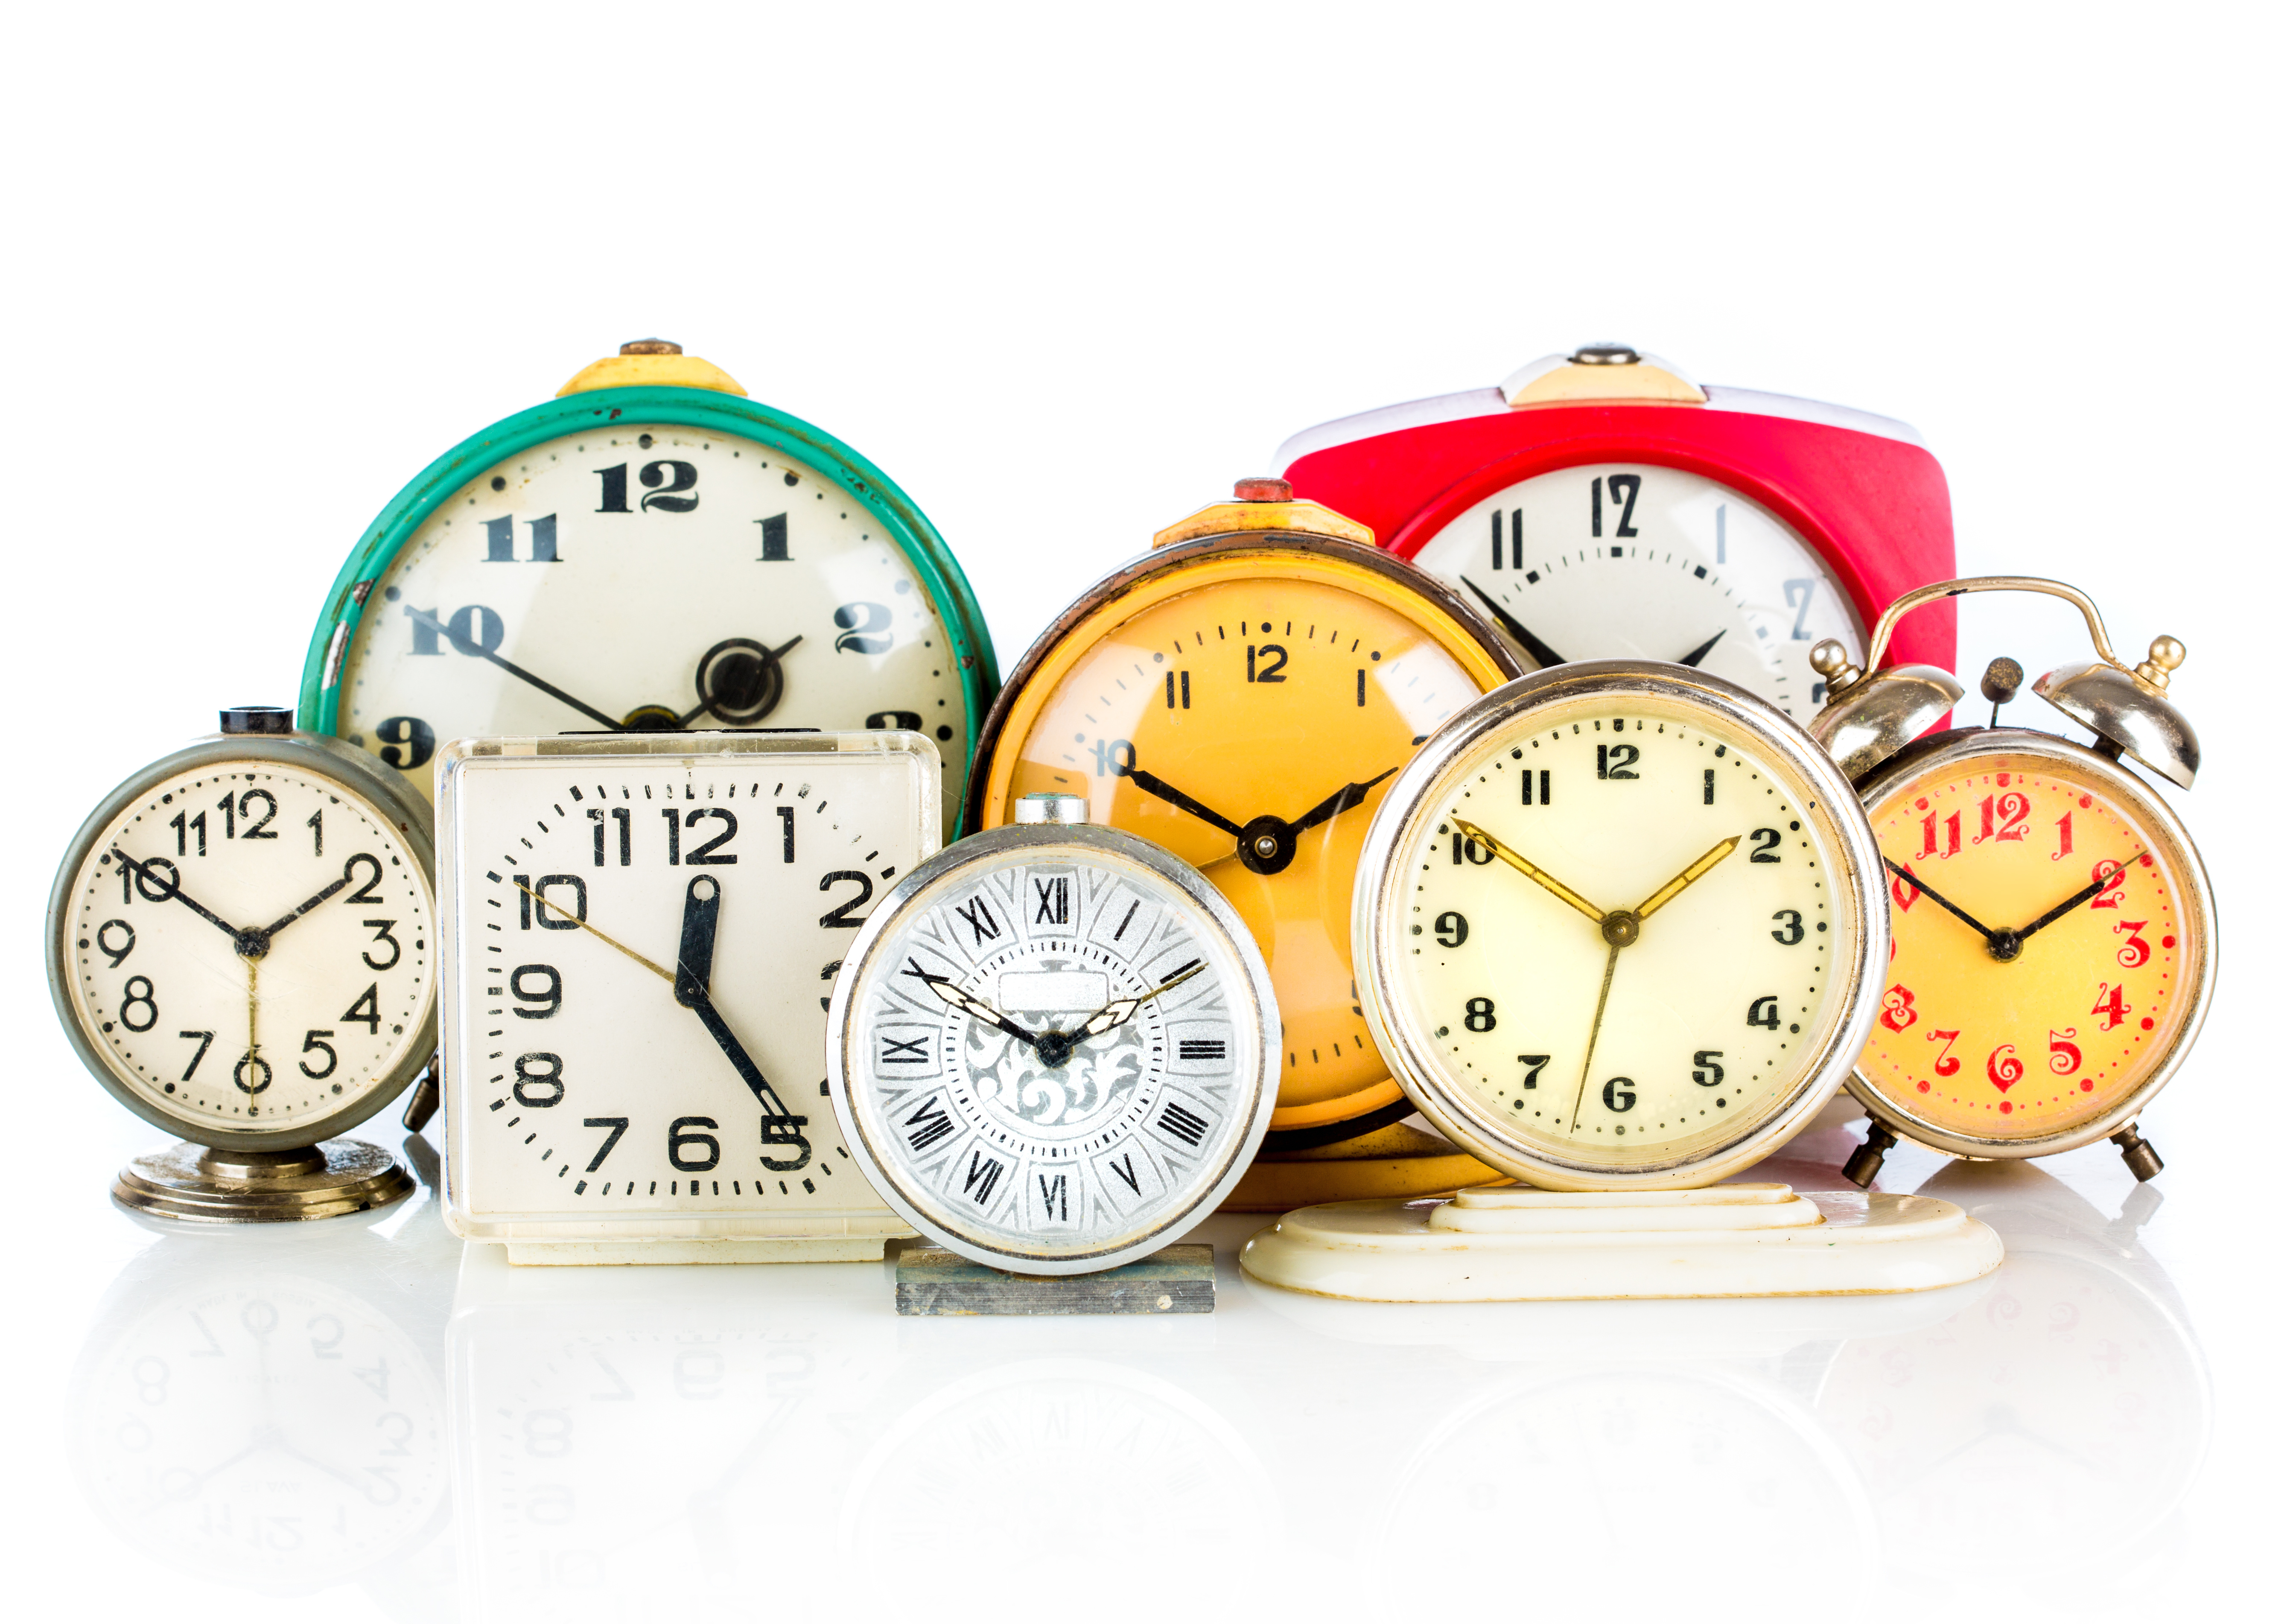 Several different analog clocks, all set to different times, are gathered together on a white table with a white background. 